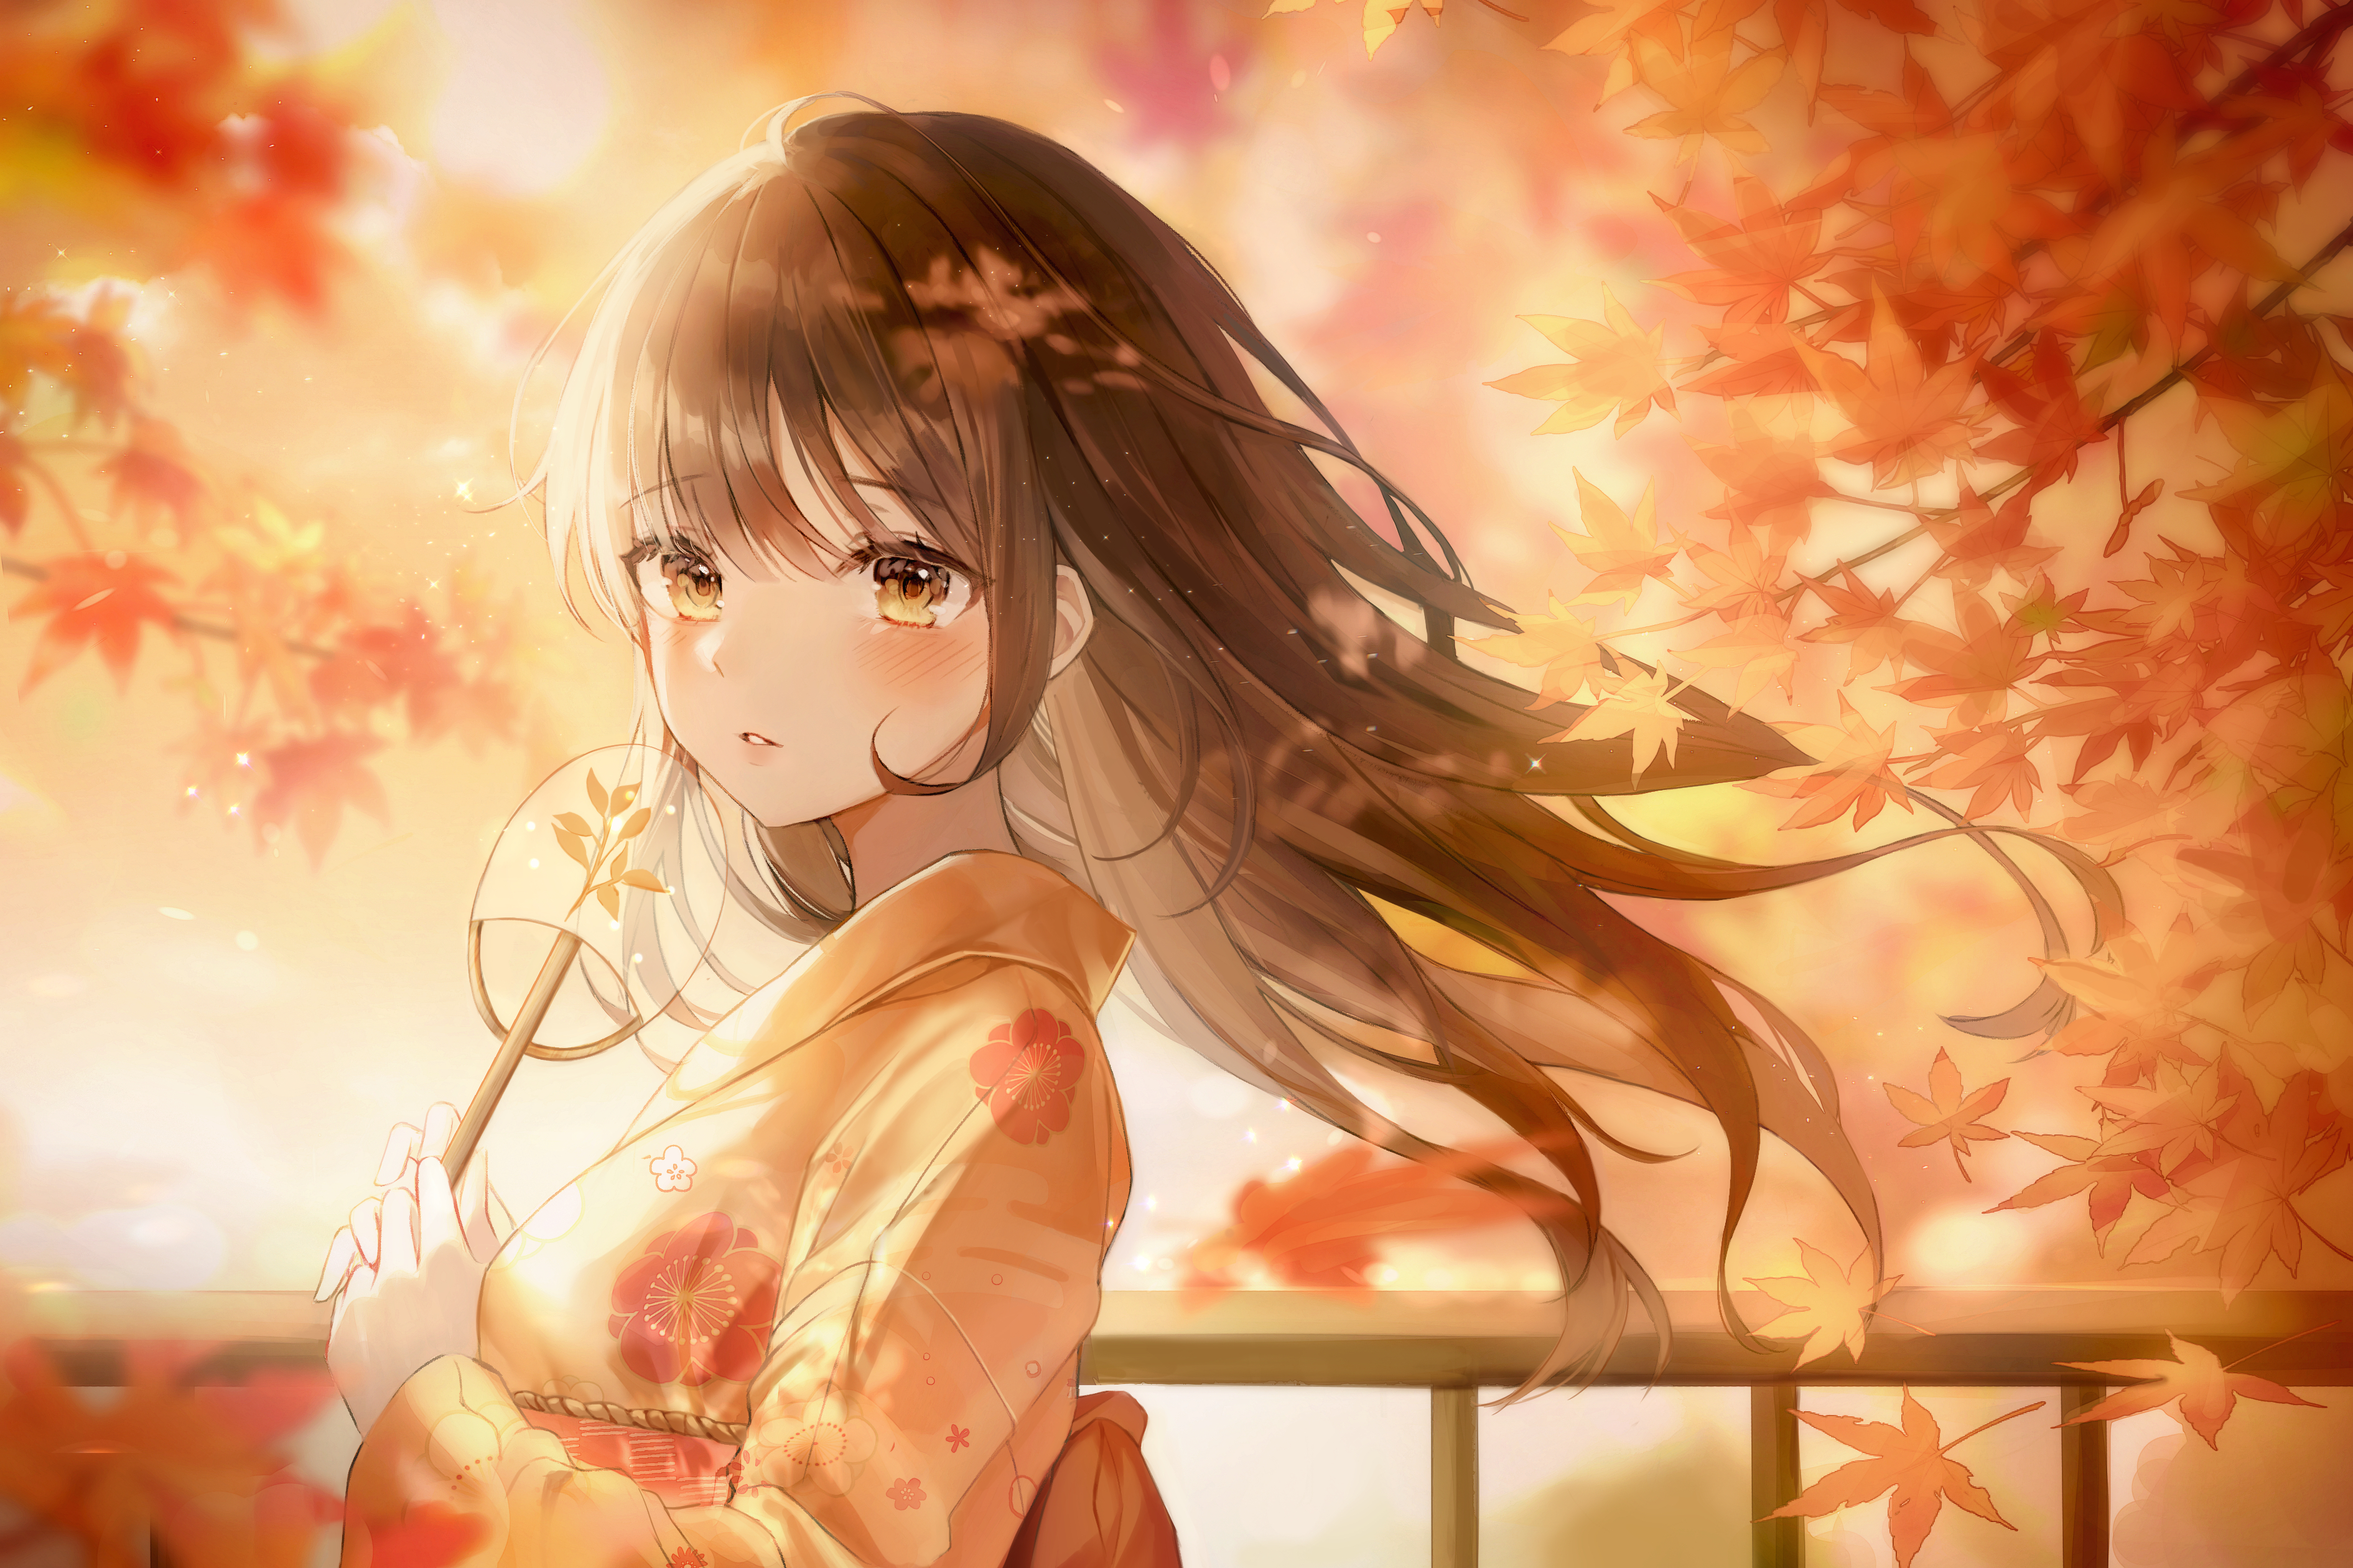 Anime girl on the background of autumn forest with maple leaves